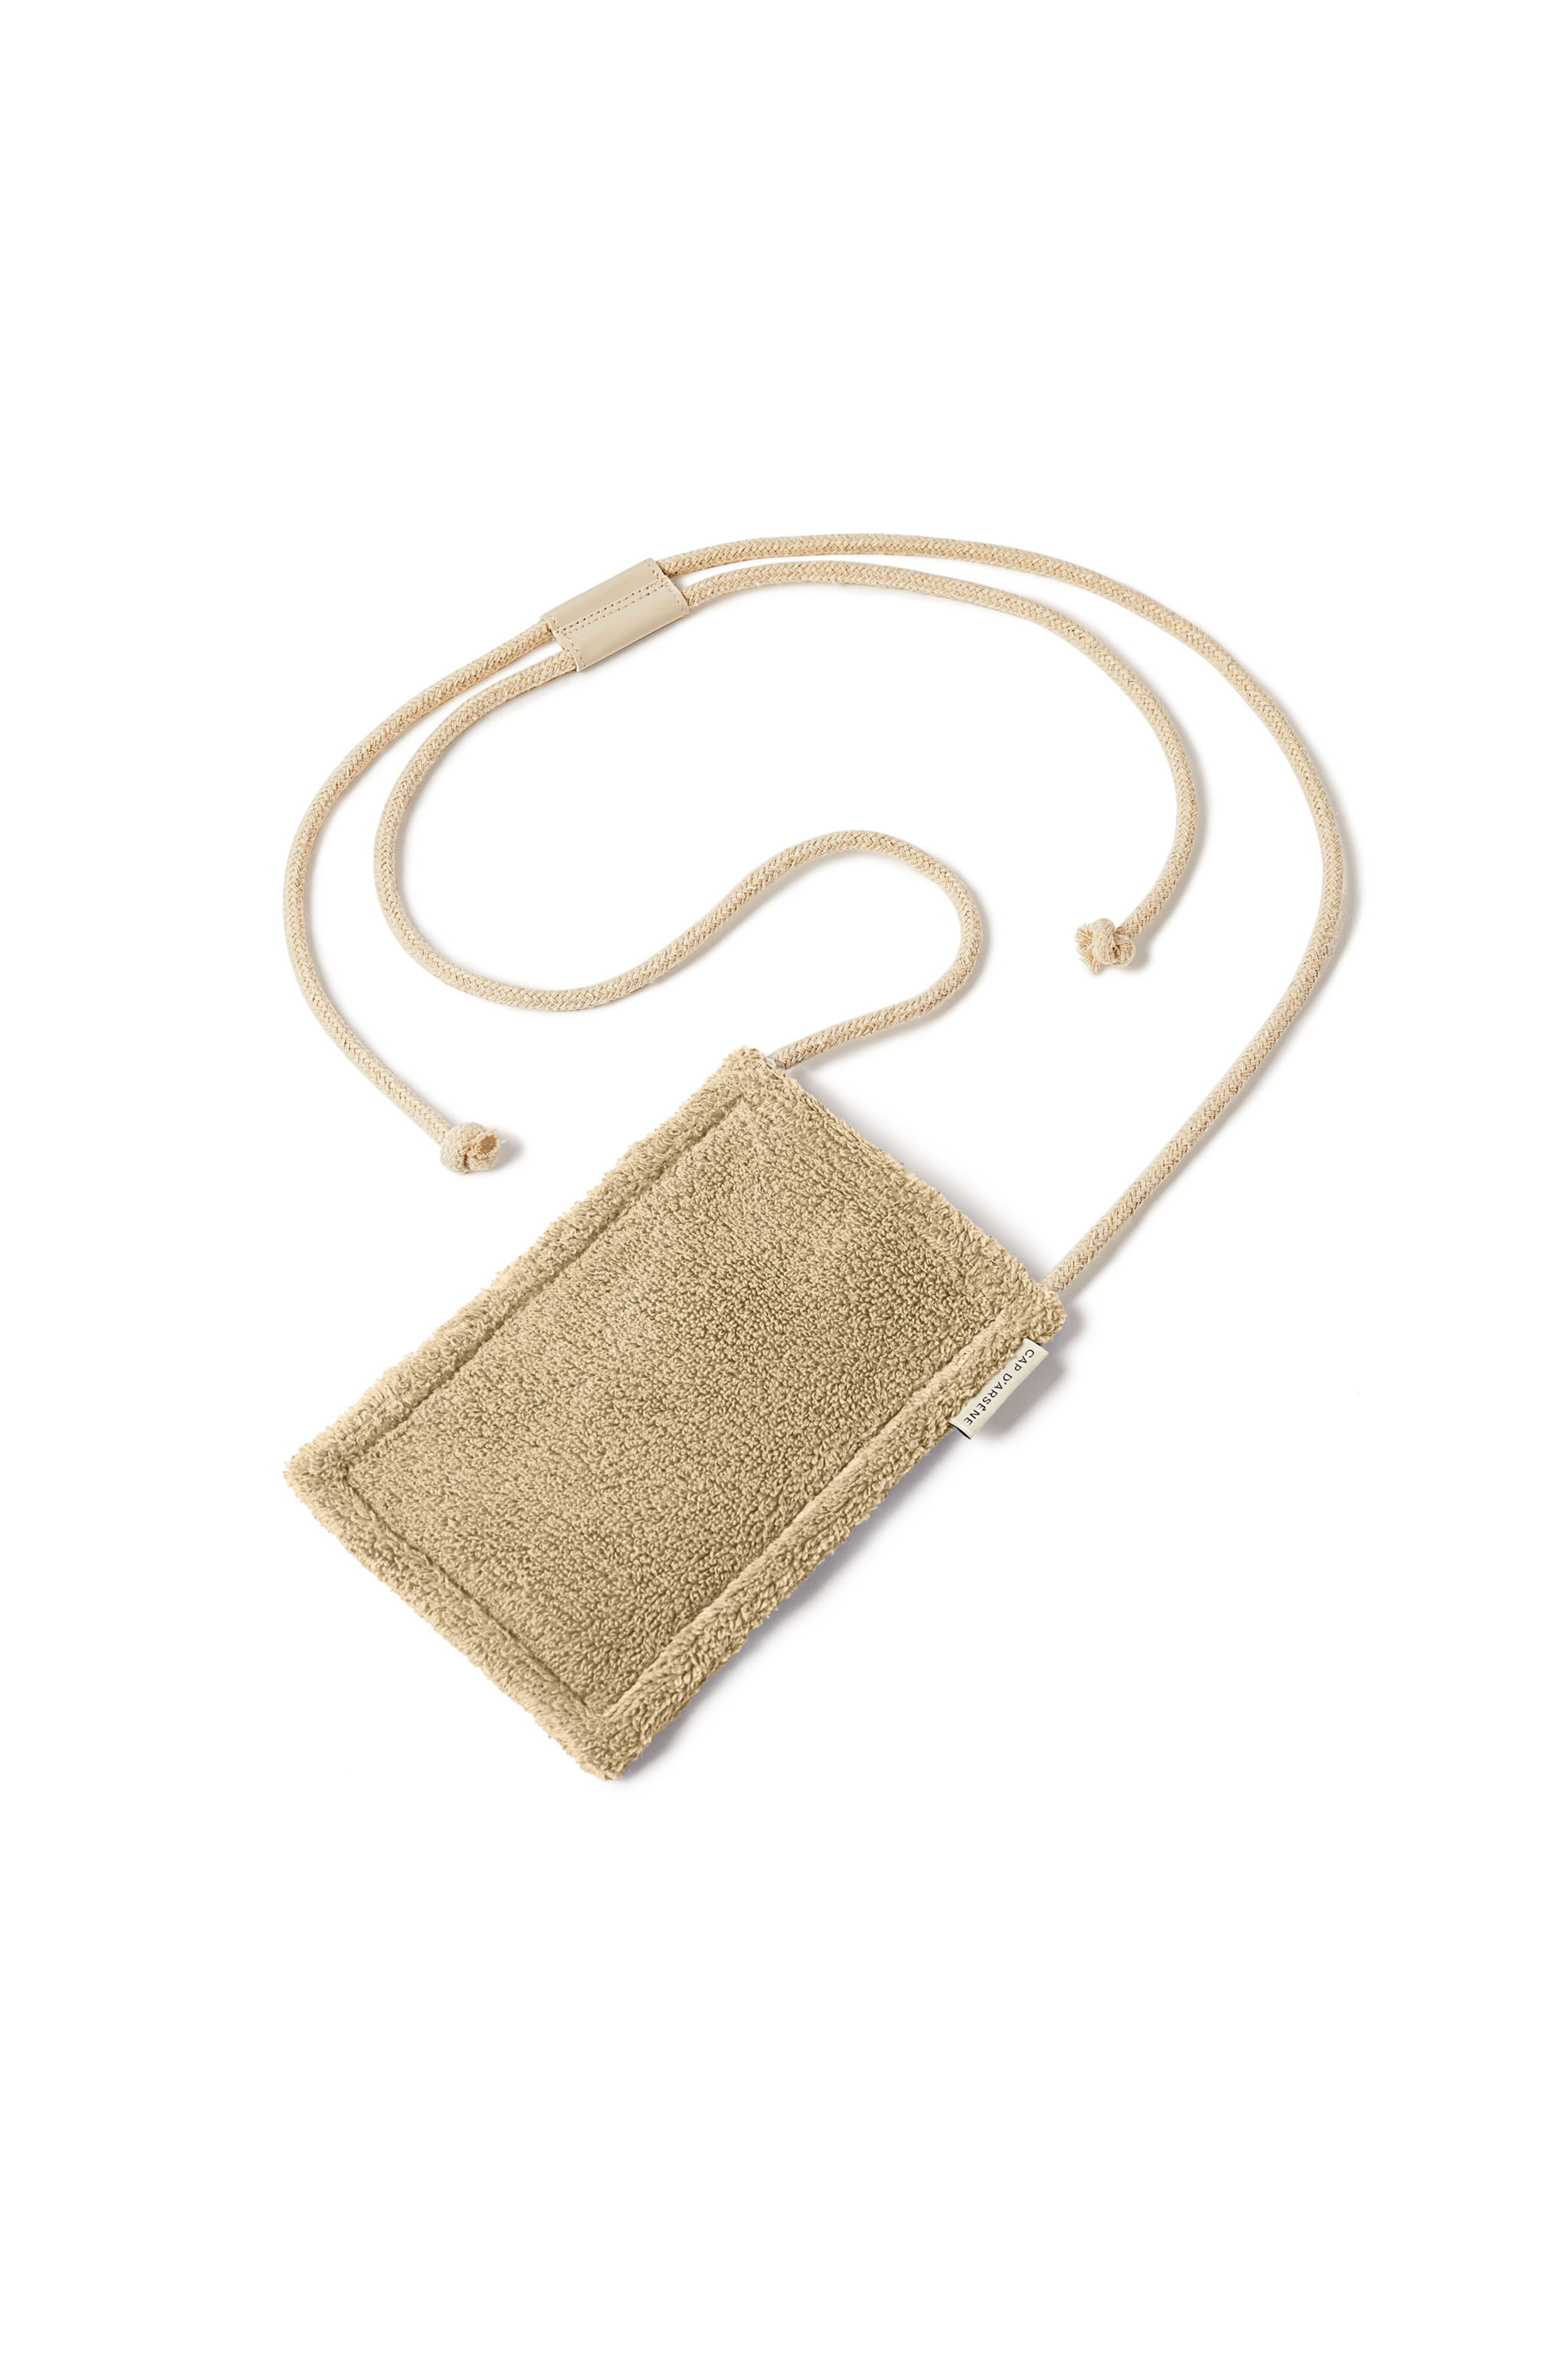 Sable phone pouch